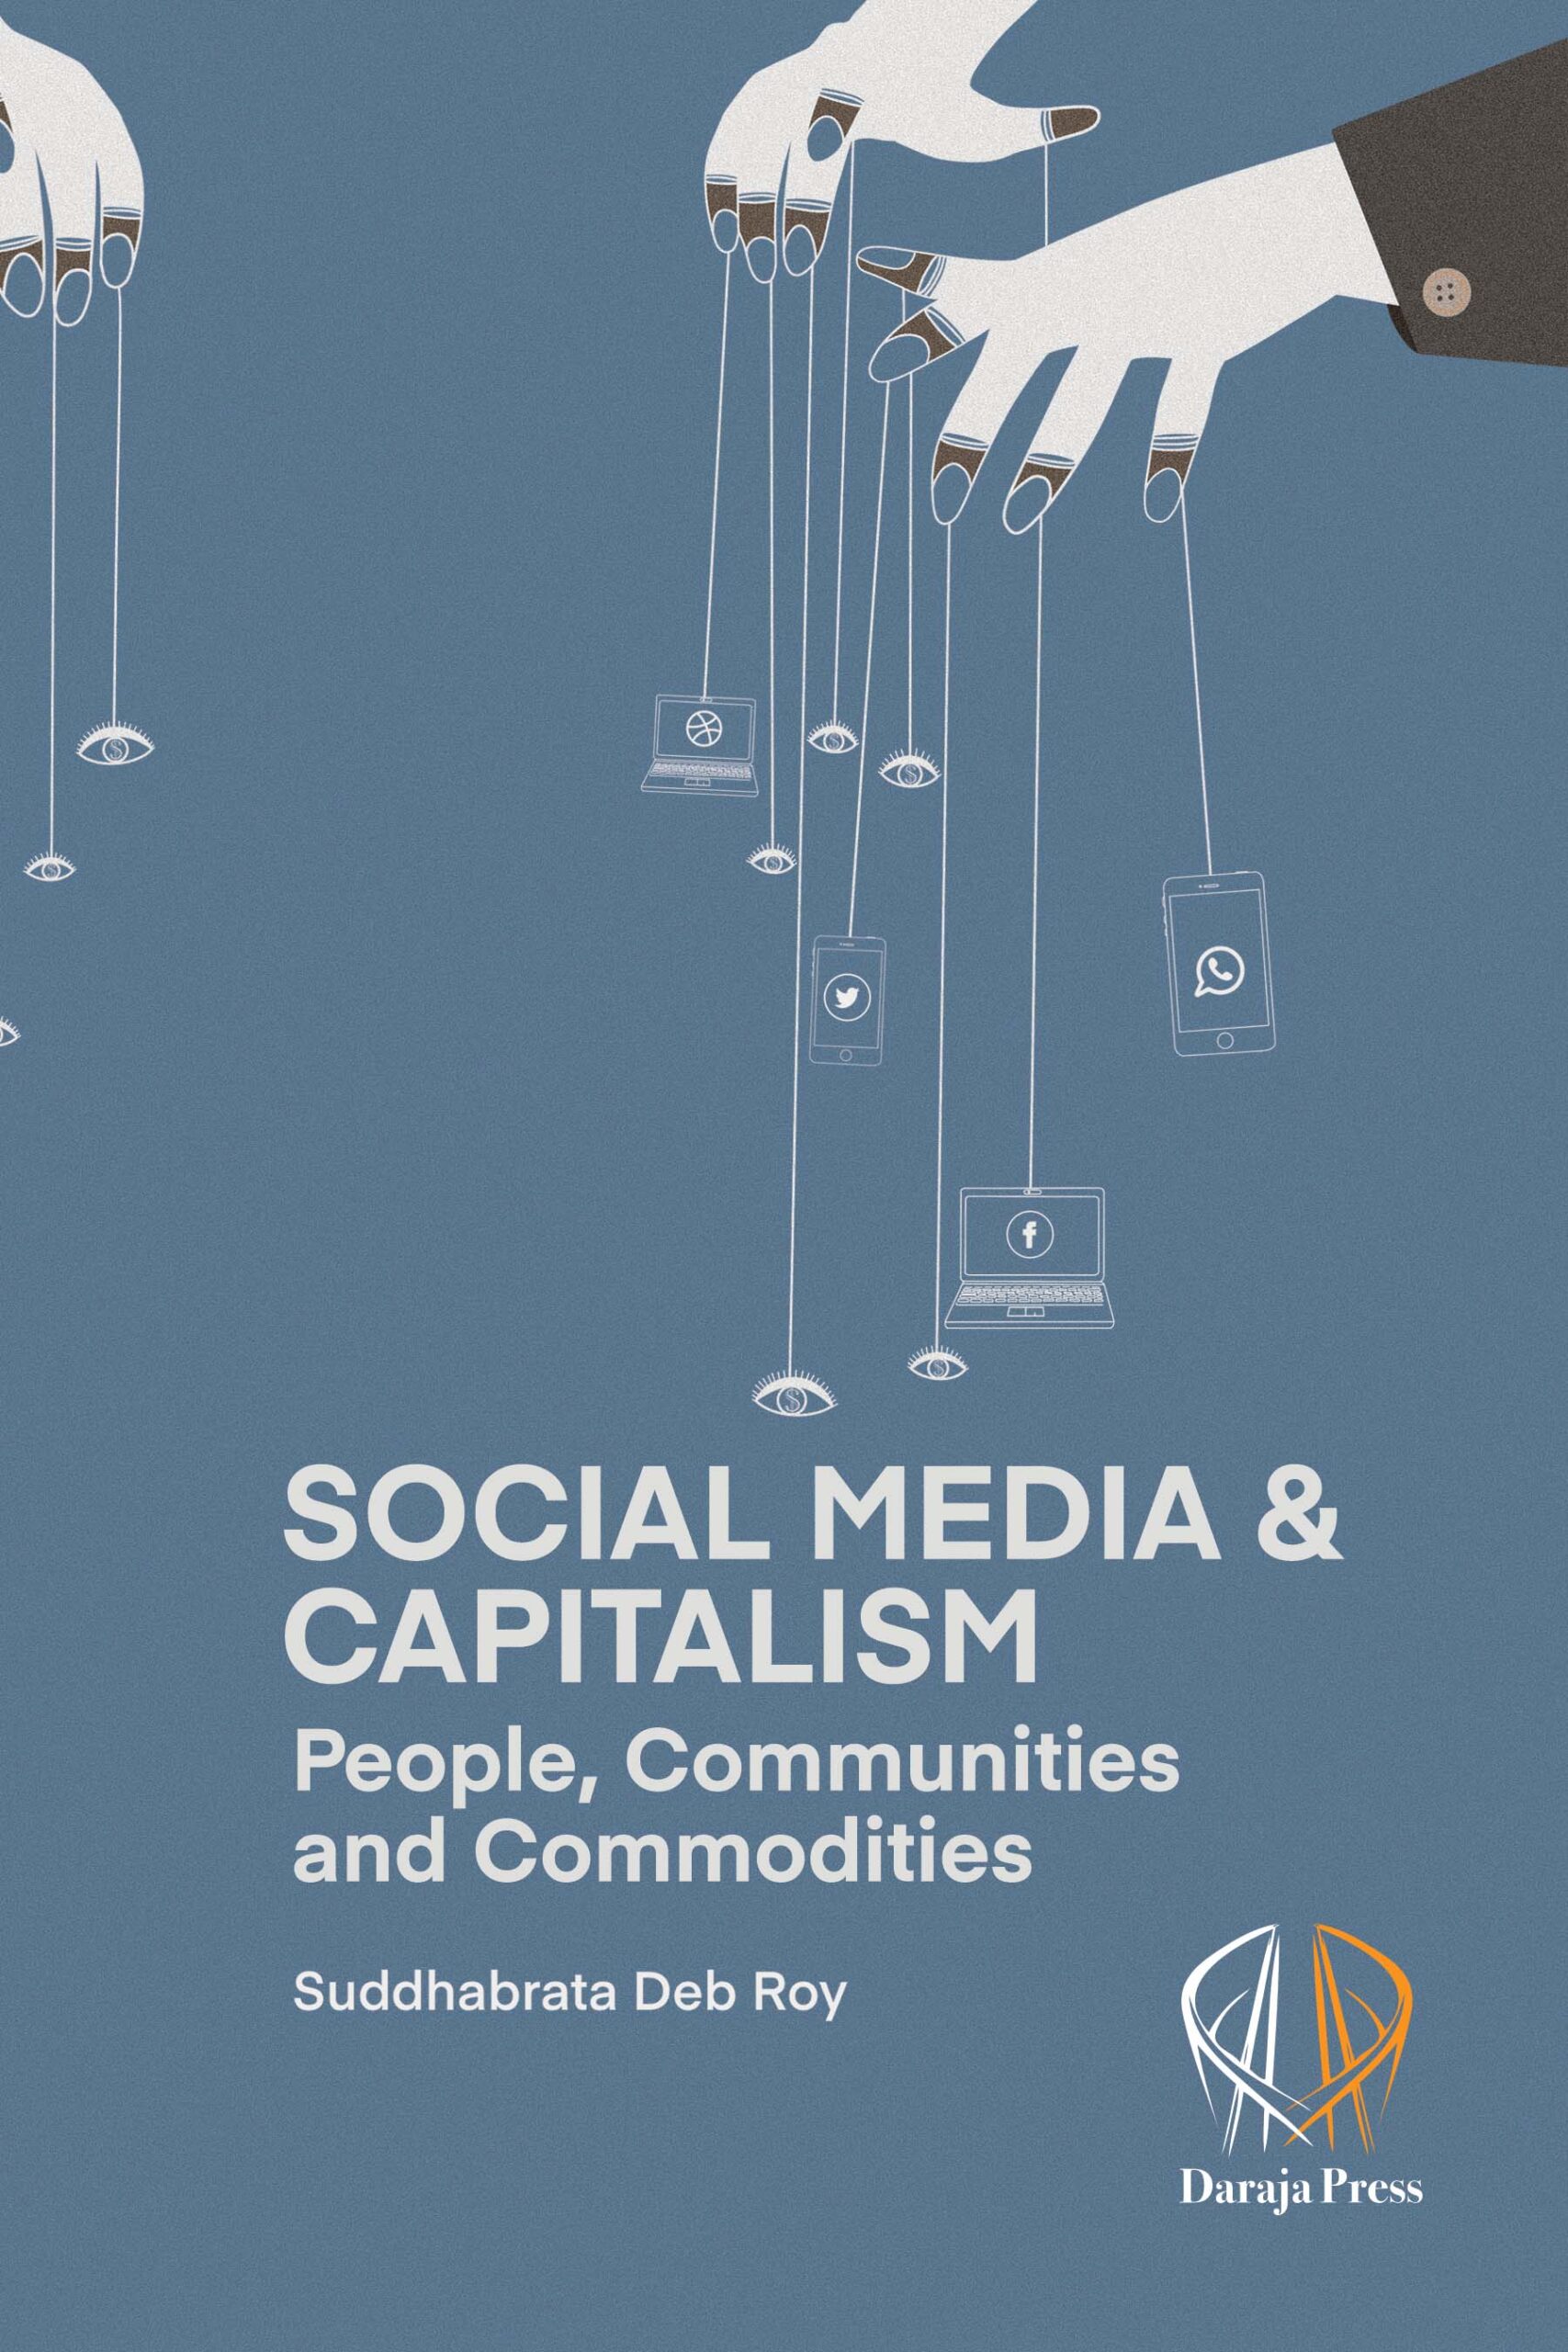 People,　Capitalism:　and　Social　Media　DarajaPress　Commodities　Communities　and　–